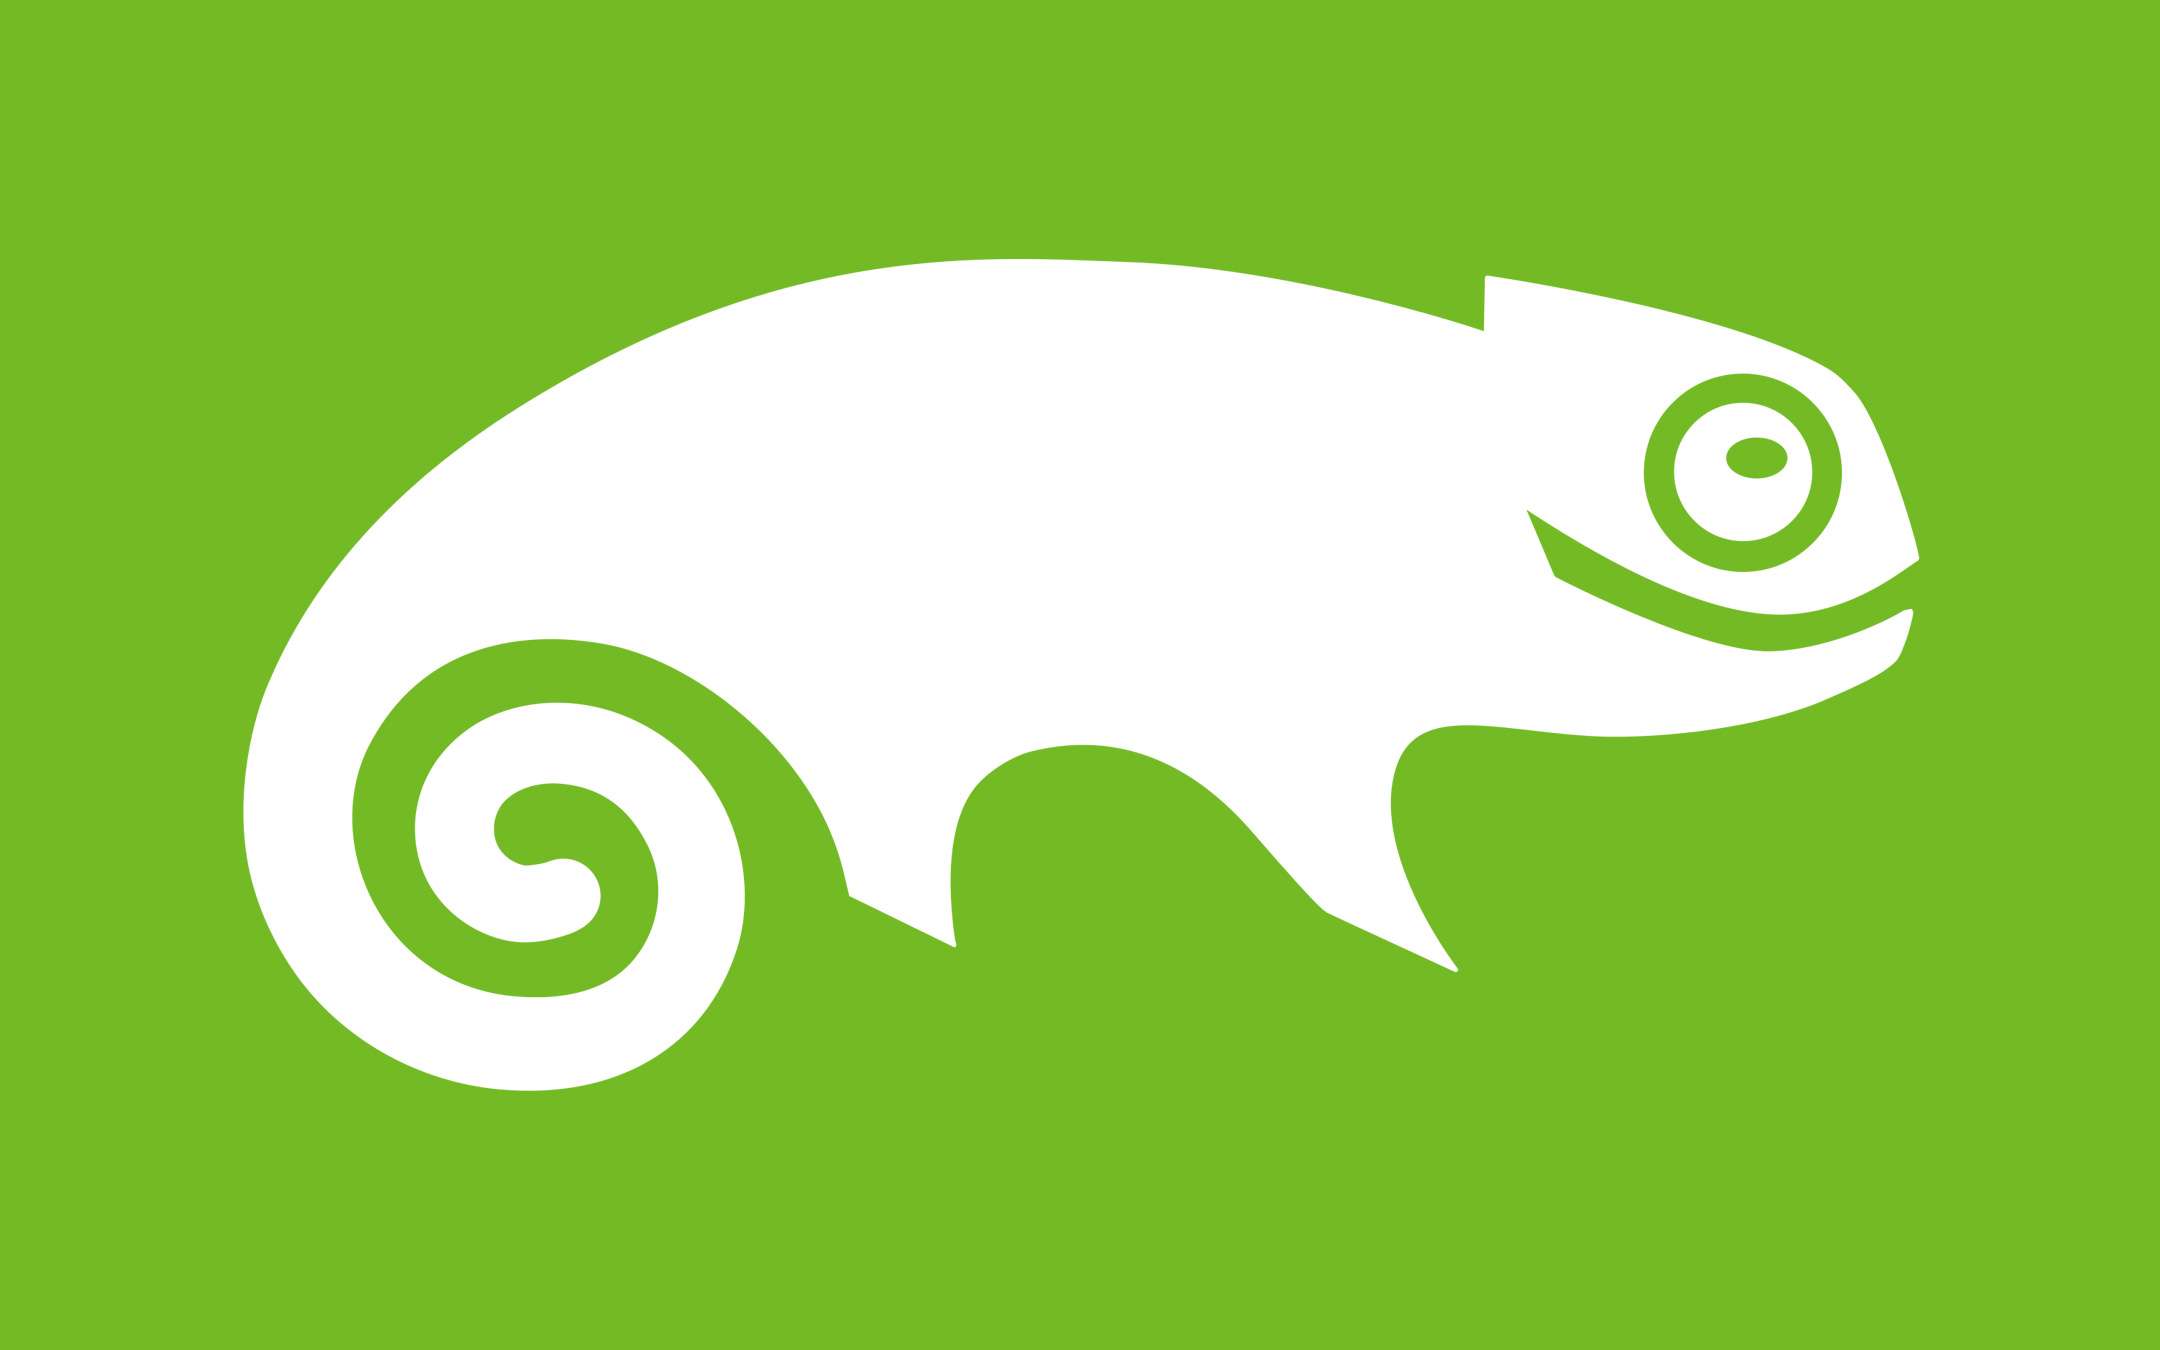 Kubernetes-as-a-Service: SUSE buys Rancher Labs